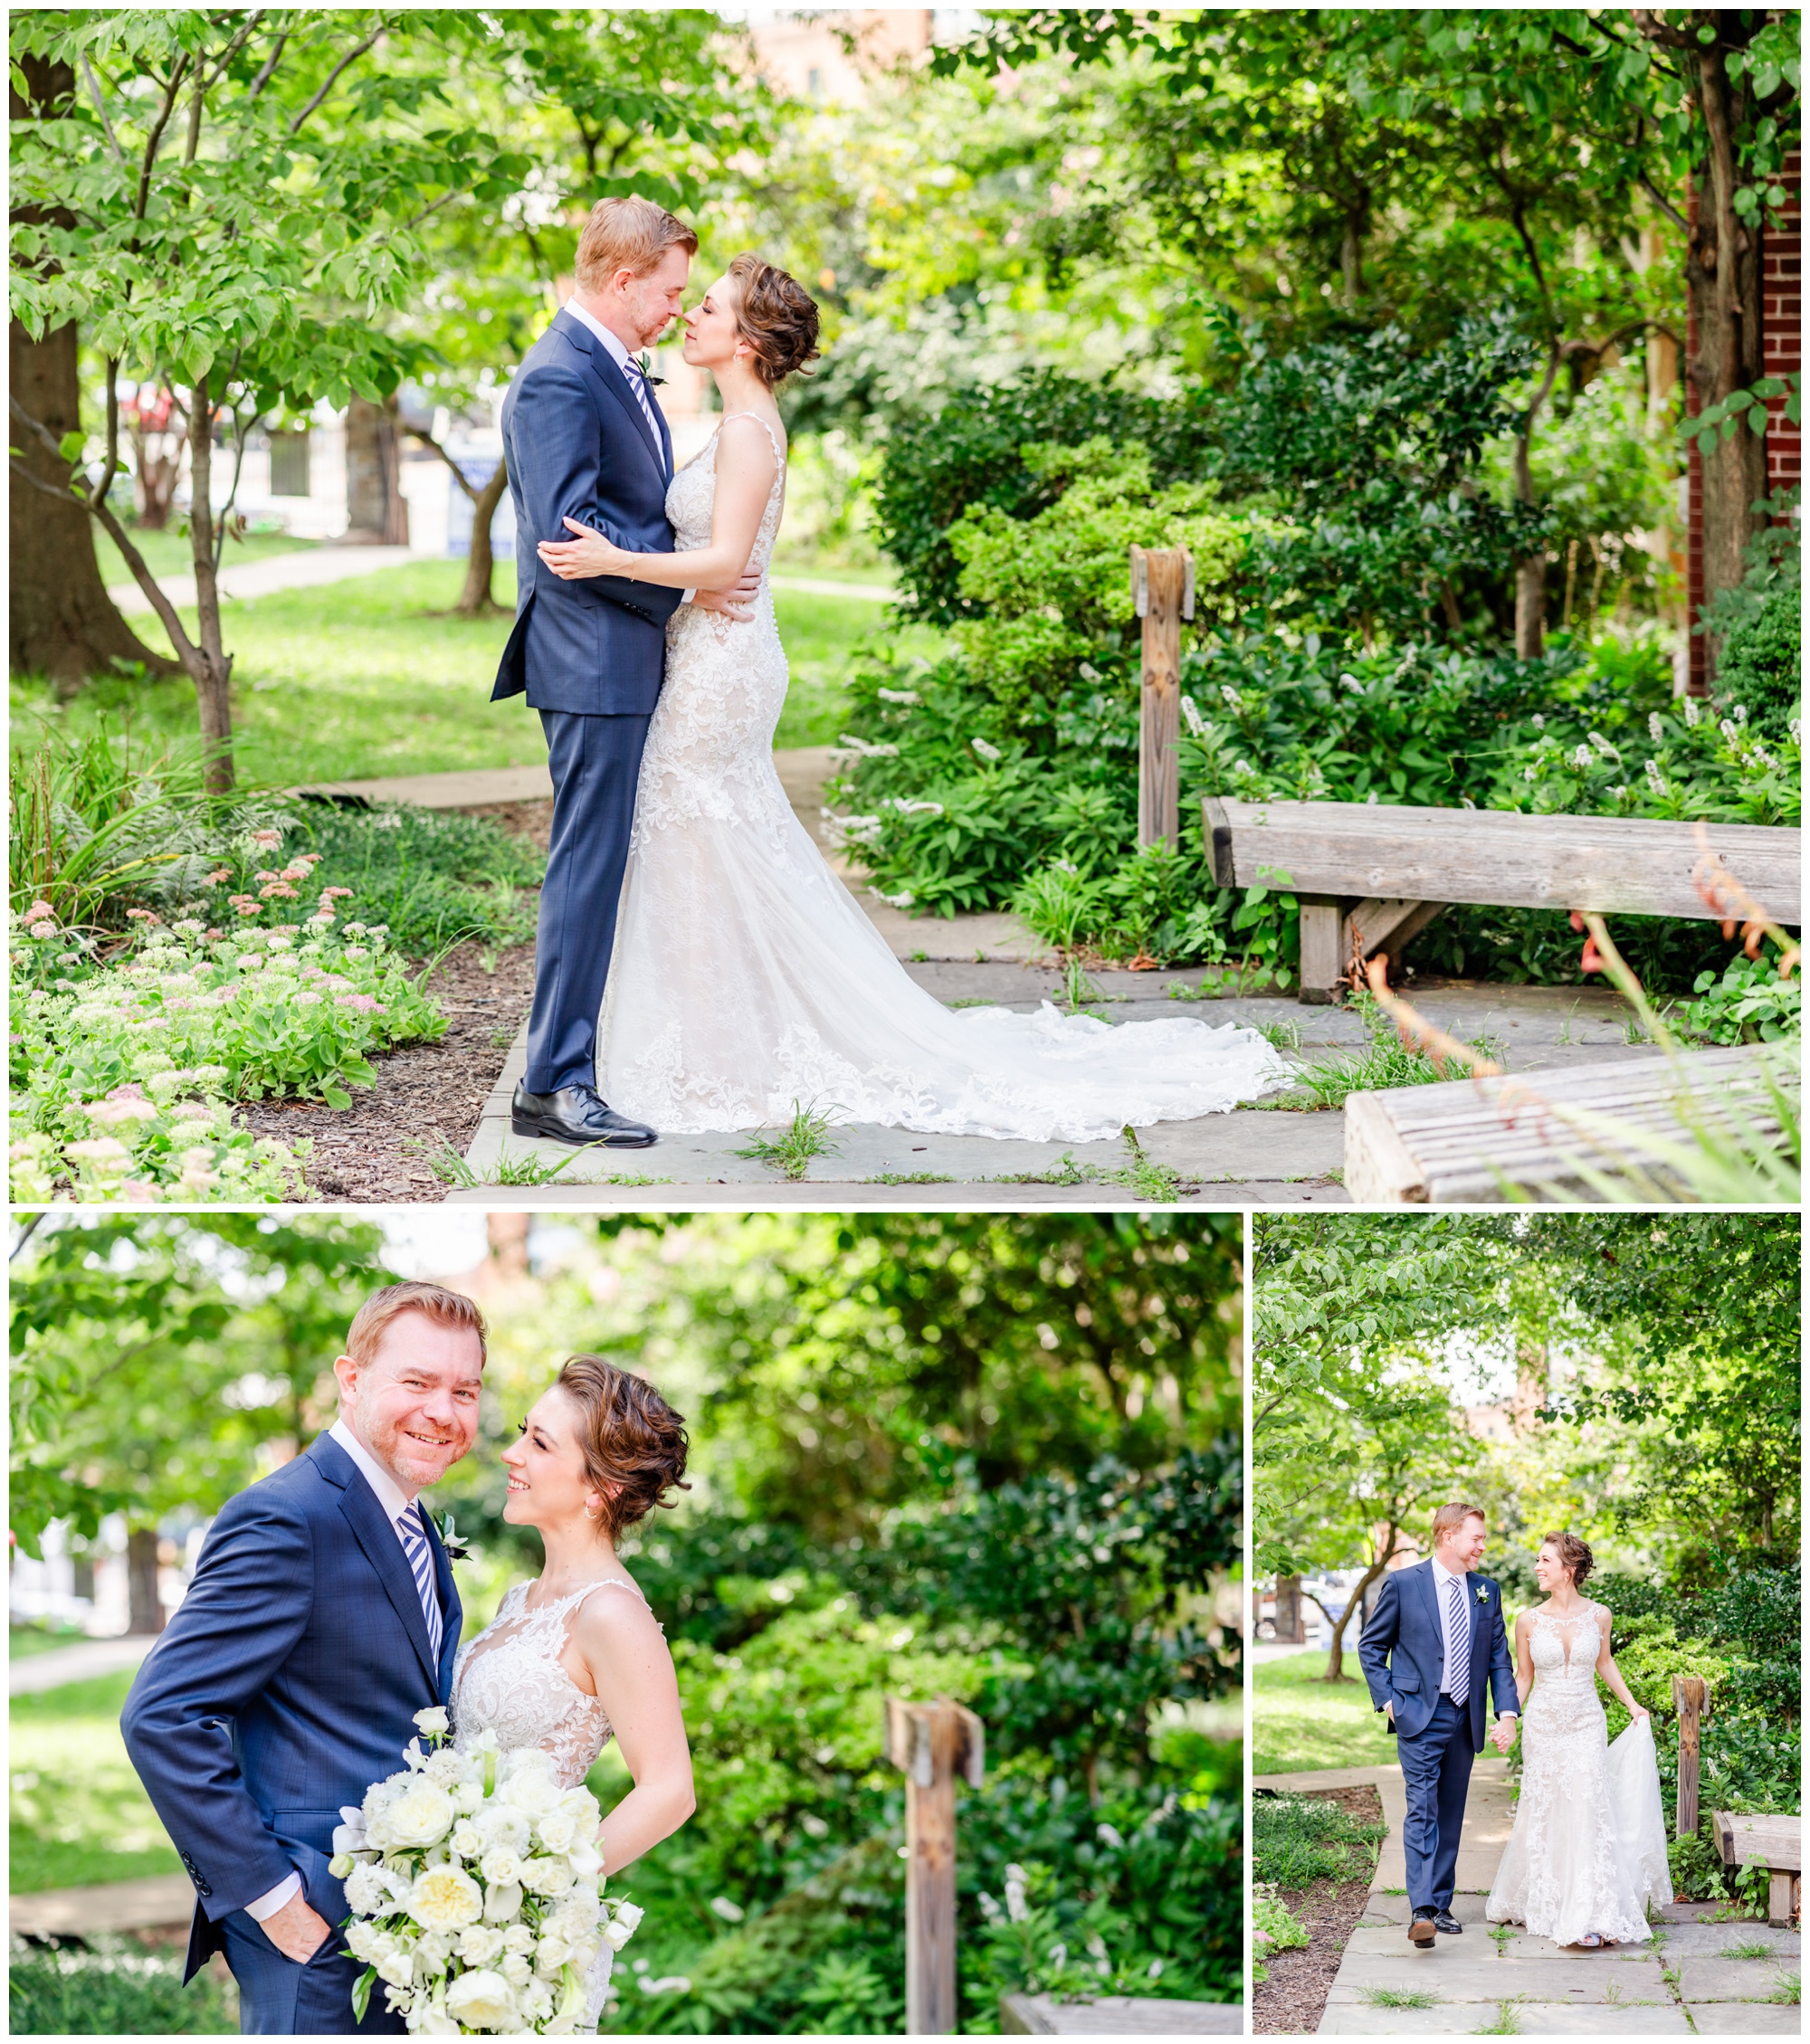 romantic Ritz Carlton Georgetown wedding, summer wedding aesthetic, green and white aesthetic, summer D.C. wedding, D.C. wedding venues, Ritz Carlton wedding, Washington D.C. wedding, romantic wedding aesthetic, Georgetown wedding, Rachel E.H. Photography, D.C. photographer, couple holding each other, couple on stone path, bride looking at groom 